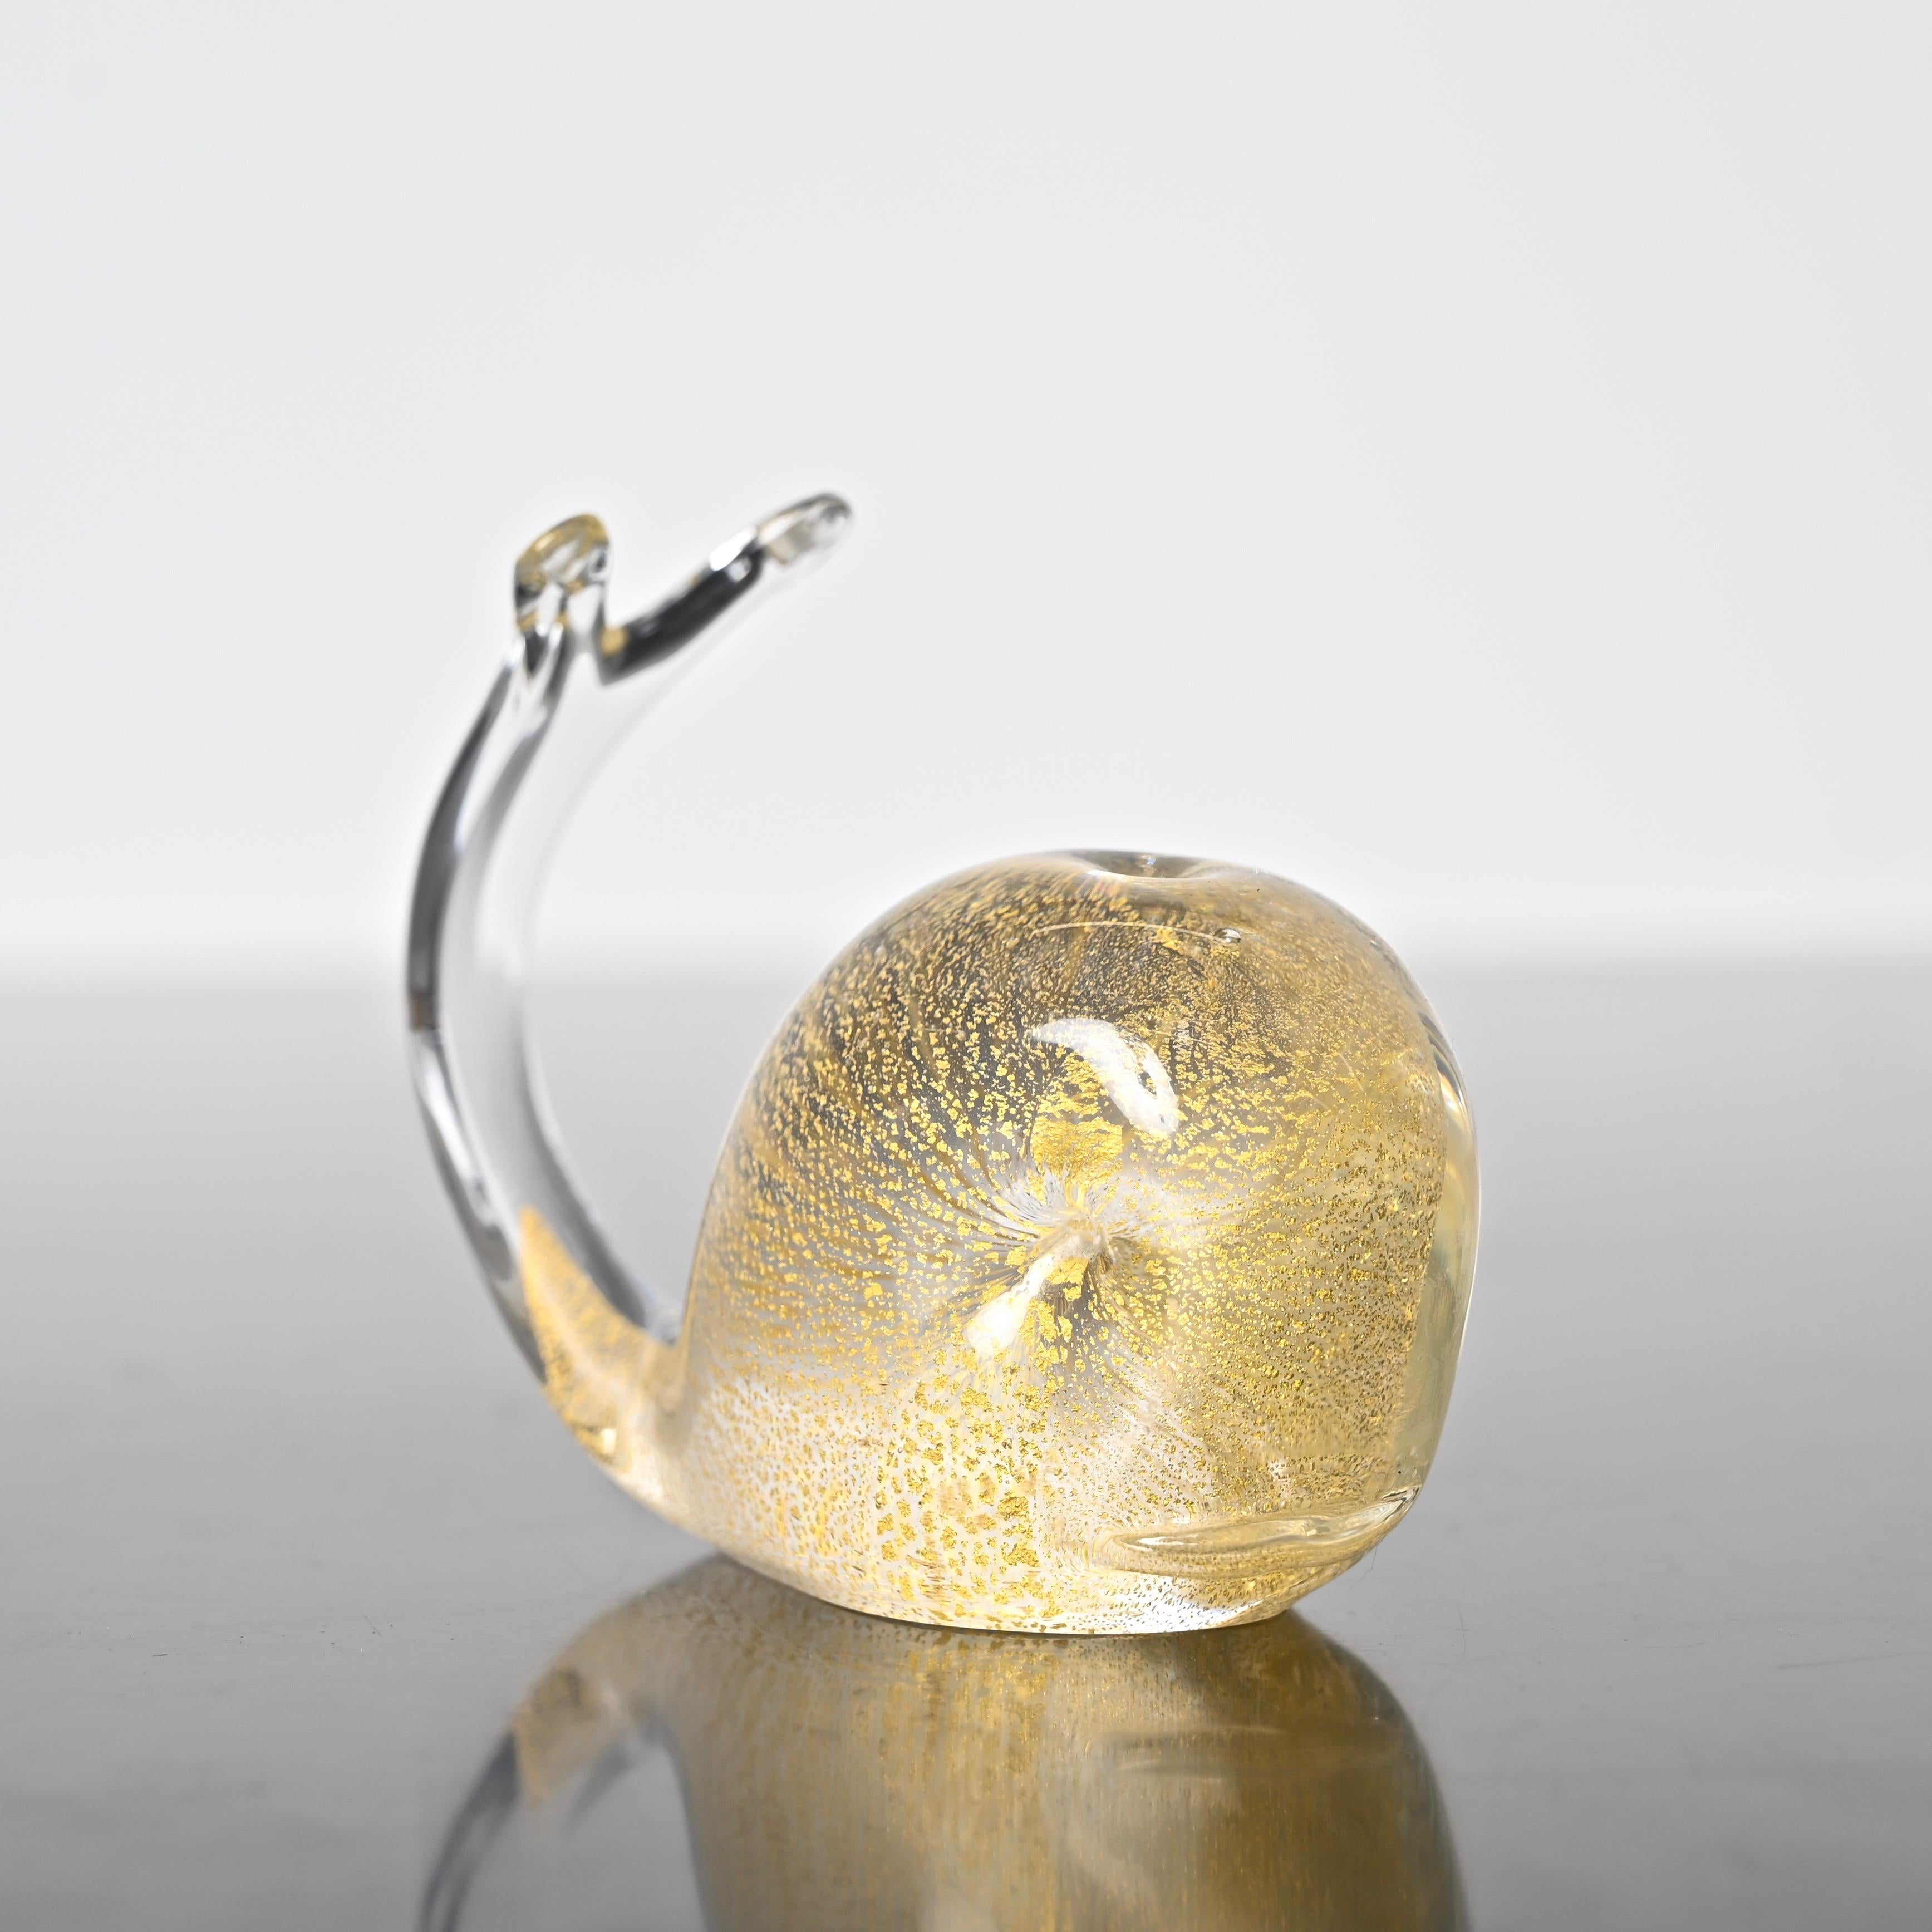 Fantastic whale-shaped Murano mouth-blown glass sculpture with gold dust inside designed by Archimede Seguso in Italy during the 1960s. shaped paperweight made mouth-blown Murano glass with gold leaf inside. This incredibly charming paperweight was